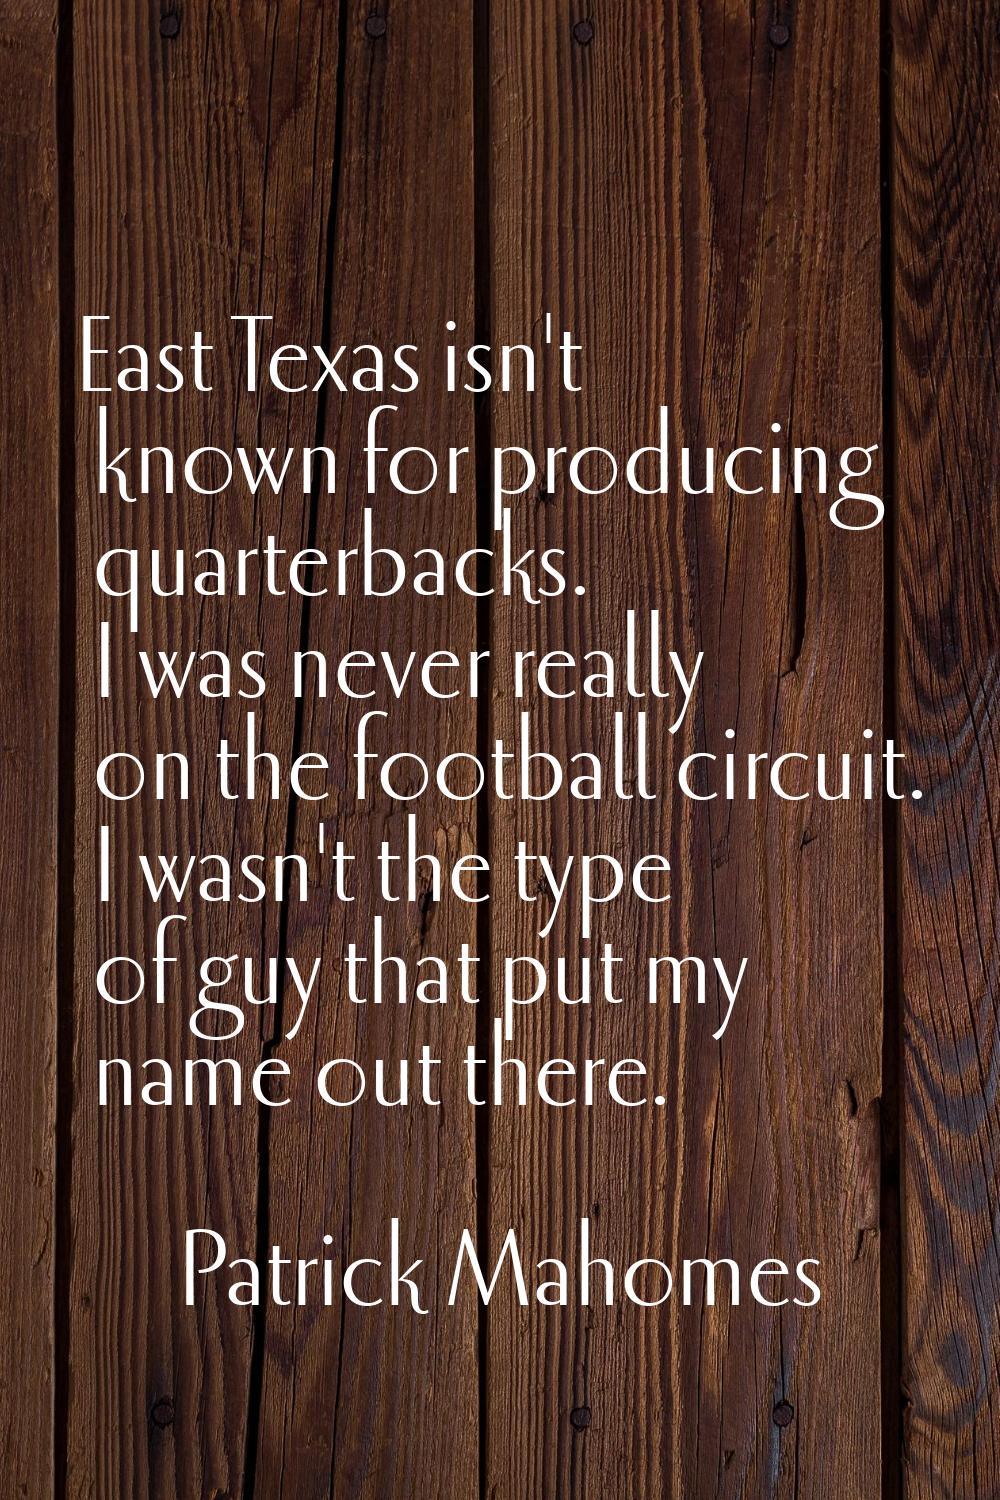 East Texas isn't known for producing quarterbacks. I was never really on the football circuit. I wa